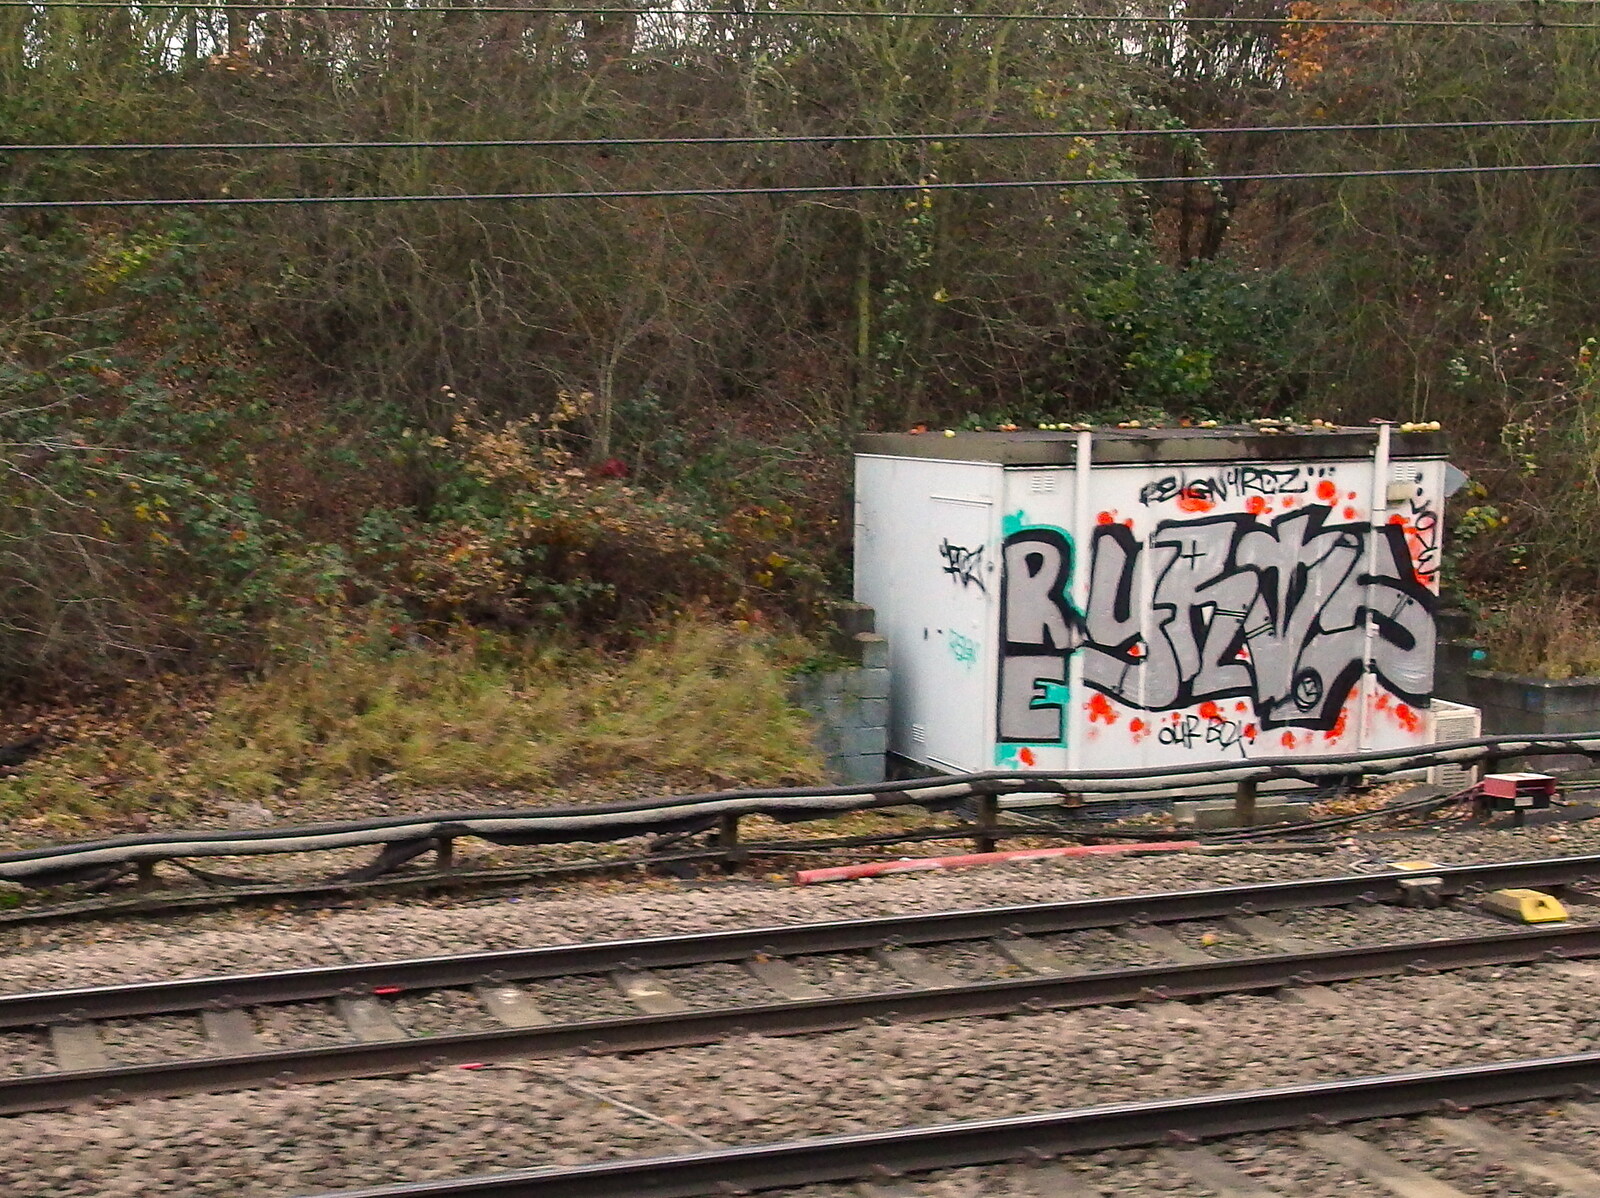 SwiftKey's Arcade Cabinet, and the Streets of Southwark, London - 5th December 2013: Trackside graffiti